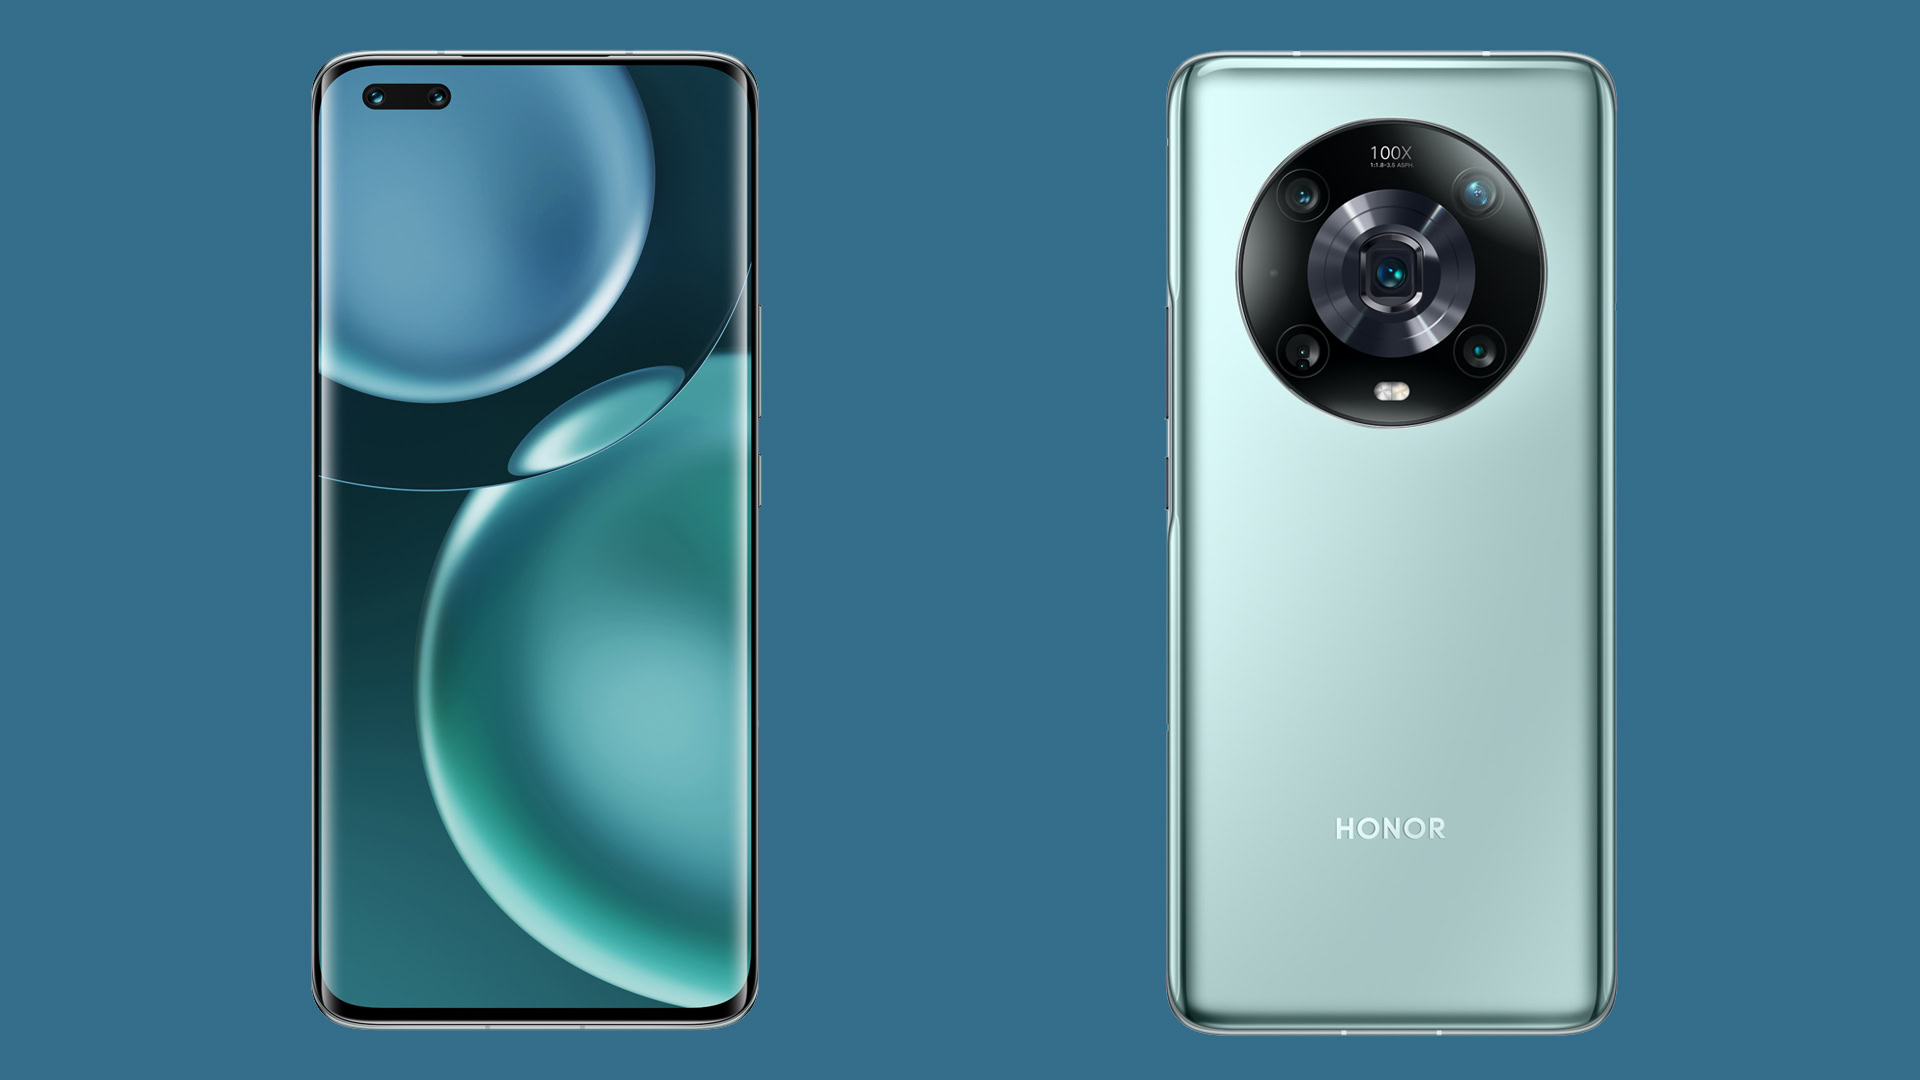 HONOR Magic 4 Pro launches with a stellar specs sheet - Android Authority